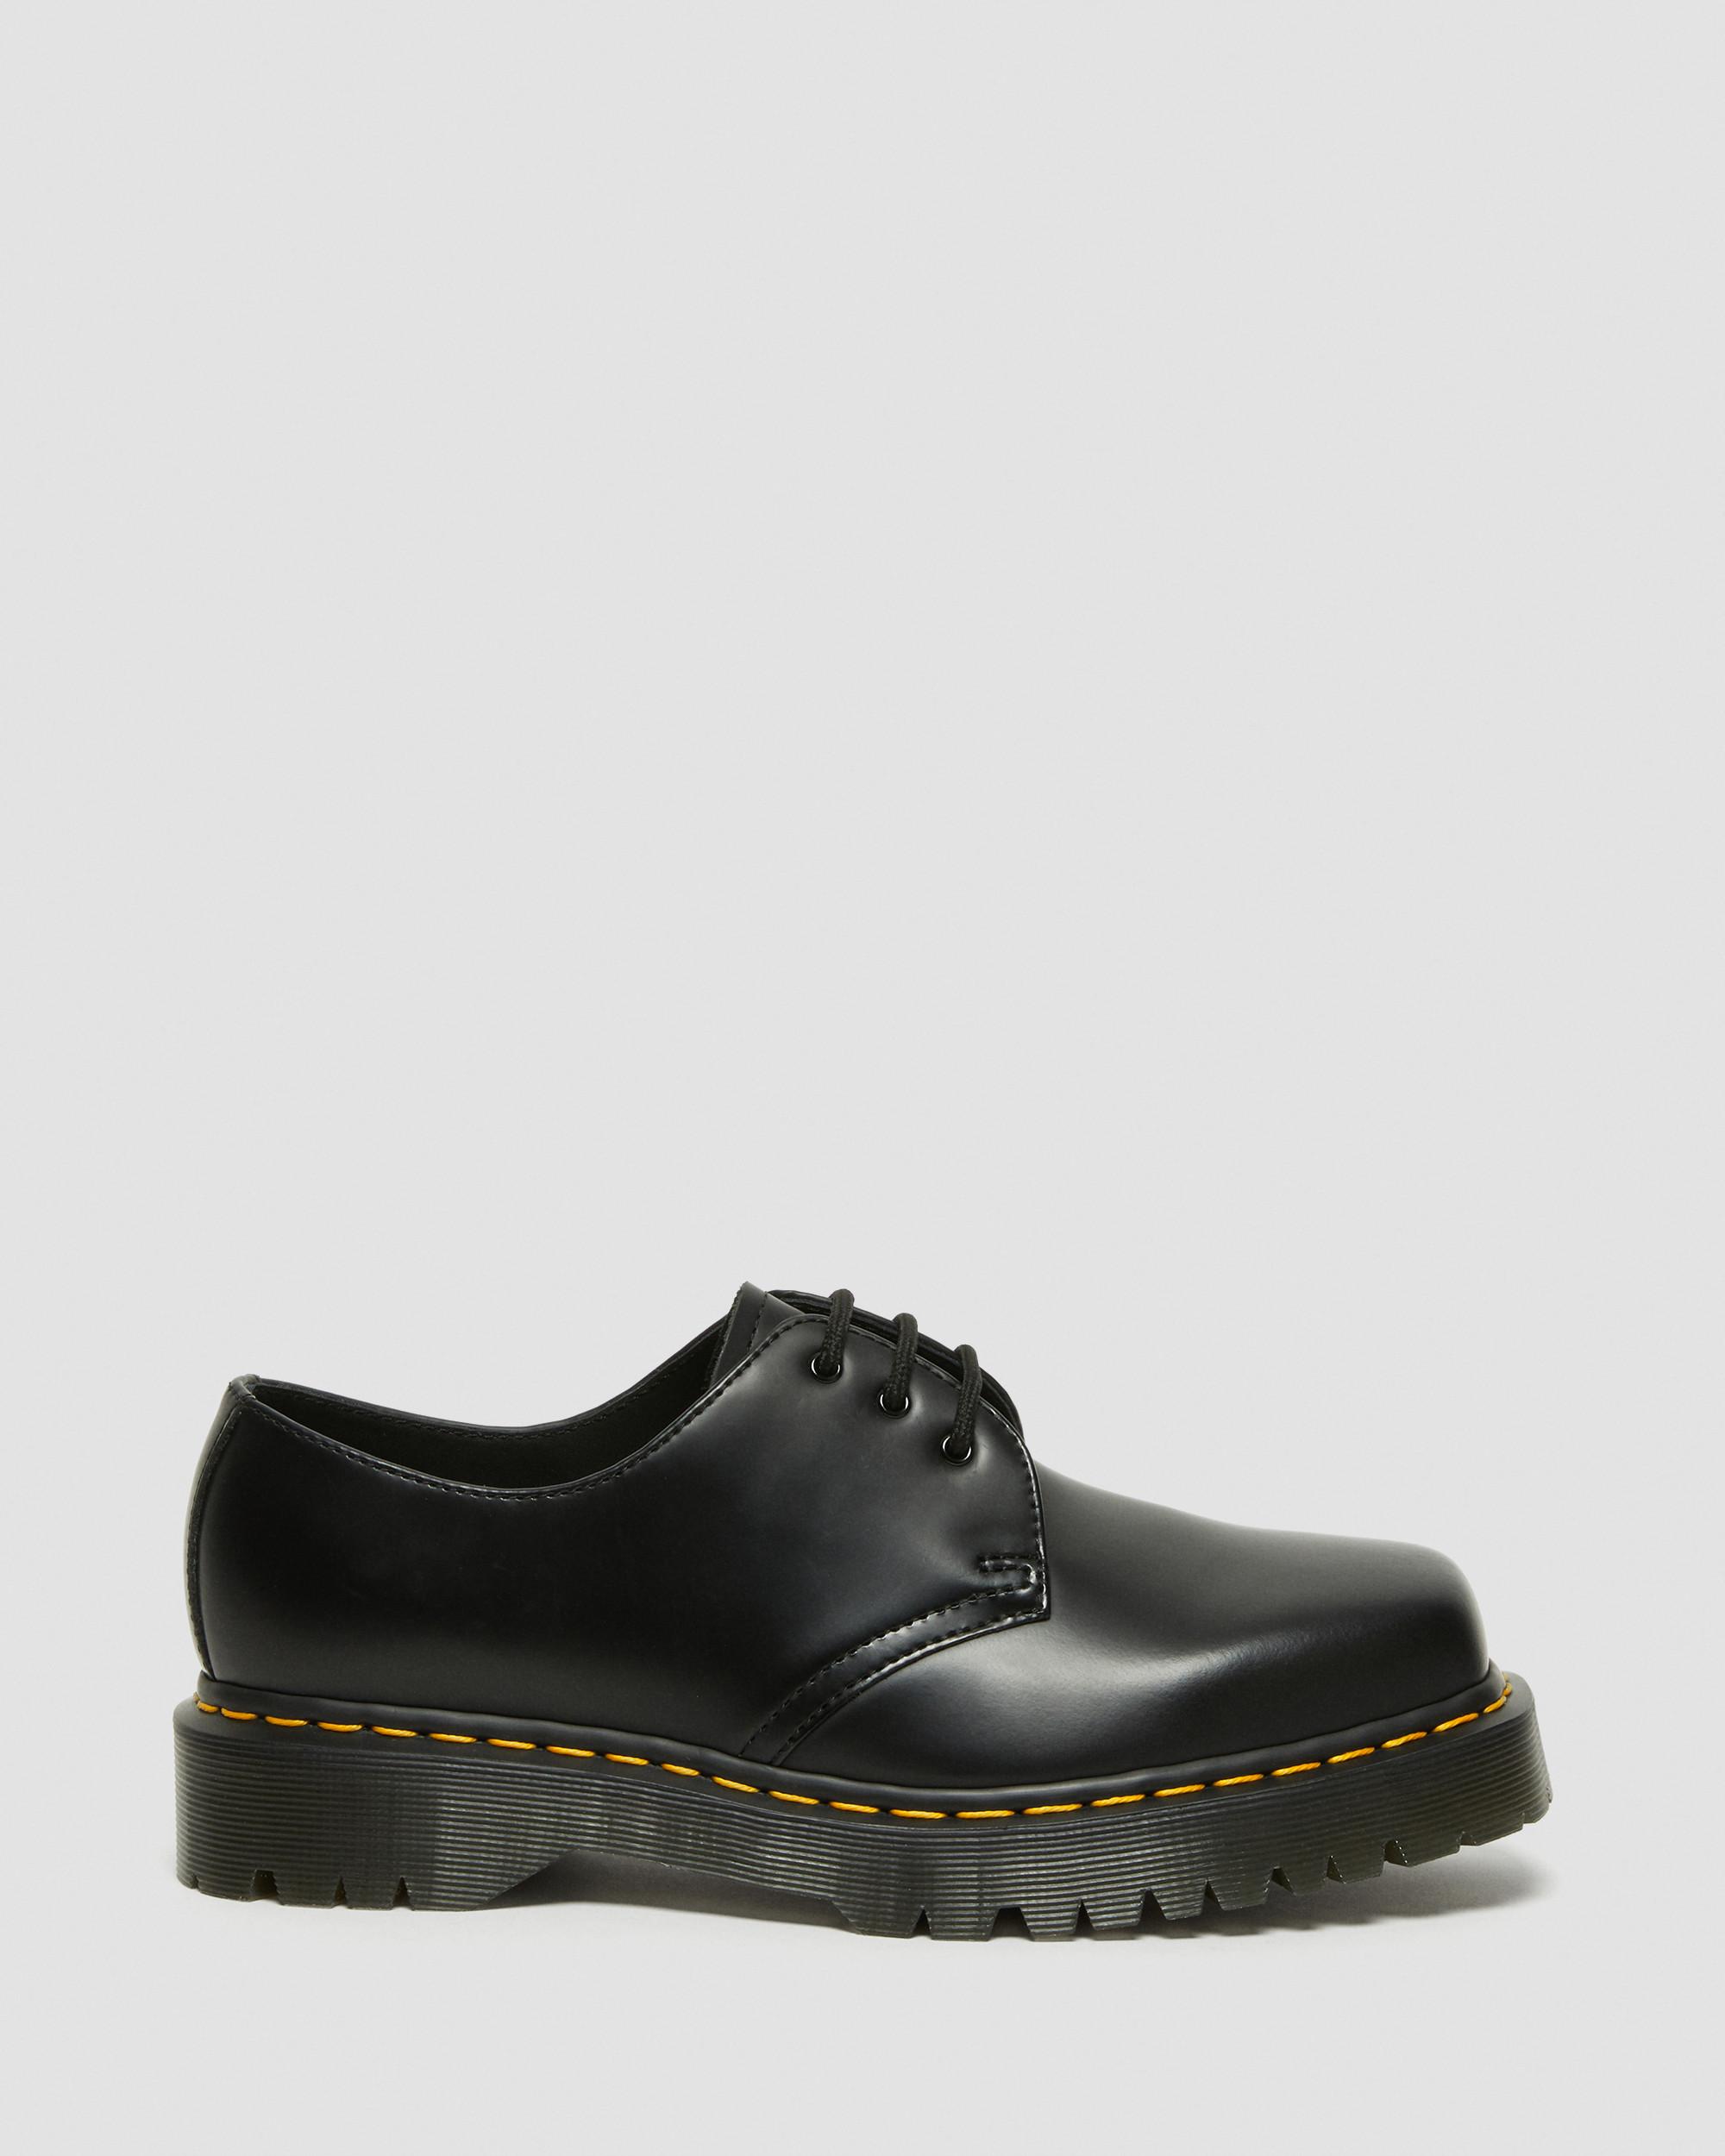 DR MARTENS 1461 Bex Squared Toe Leather Oxford Shoes